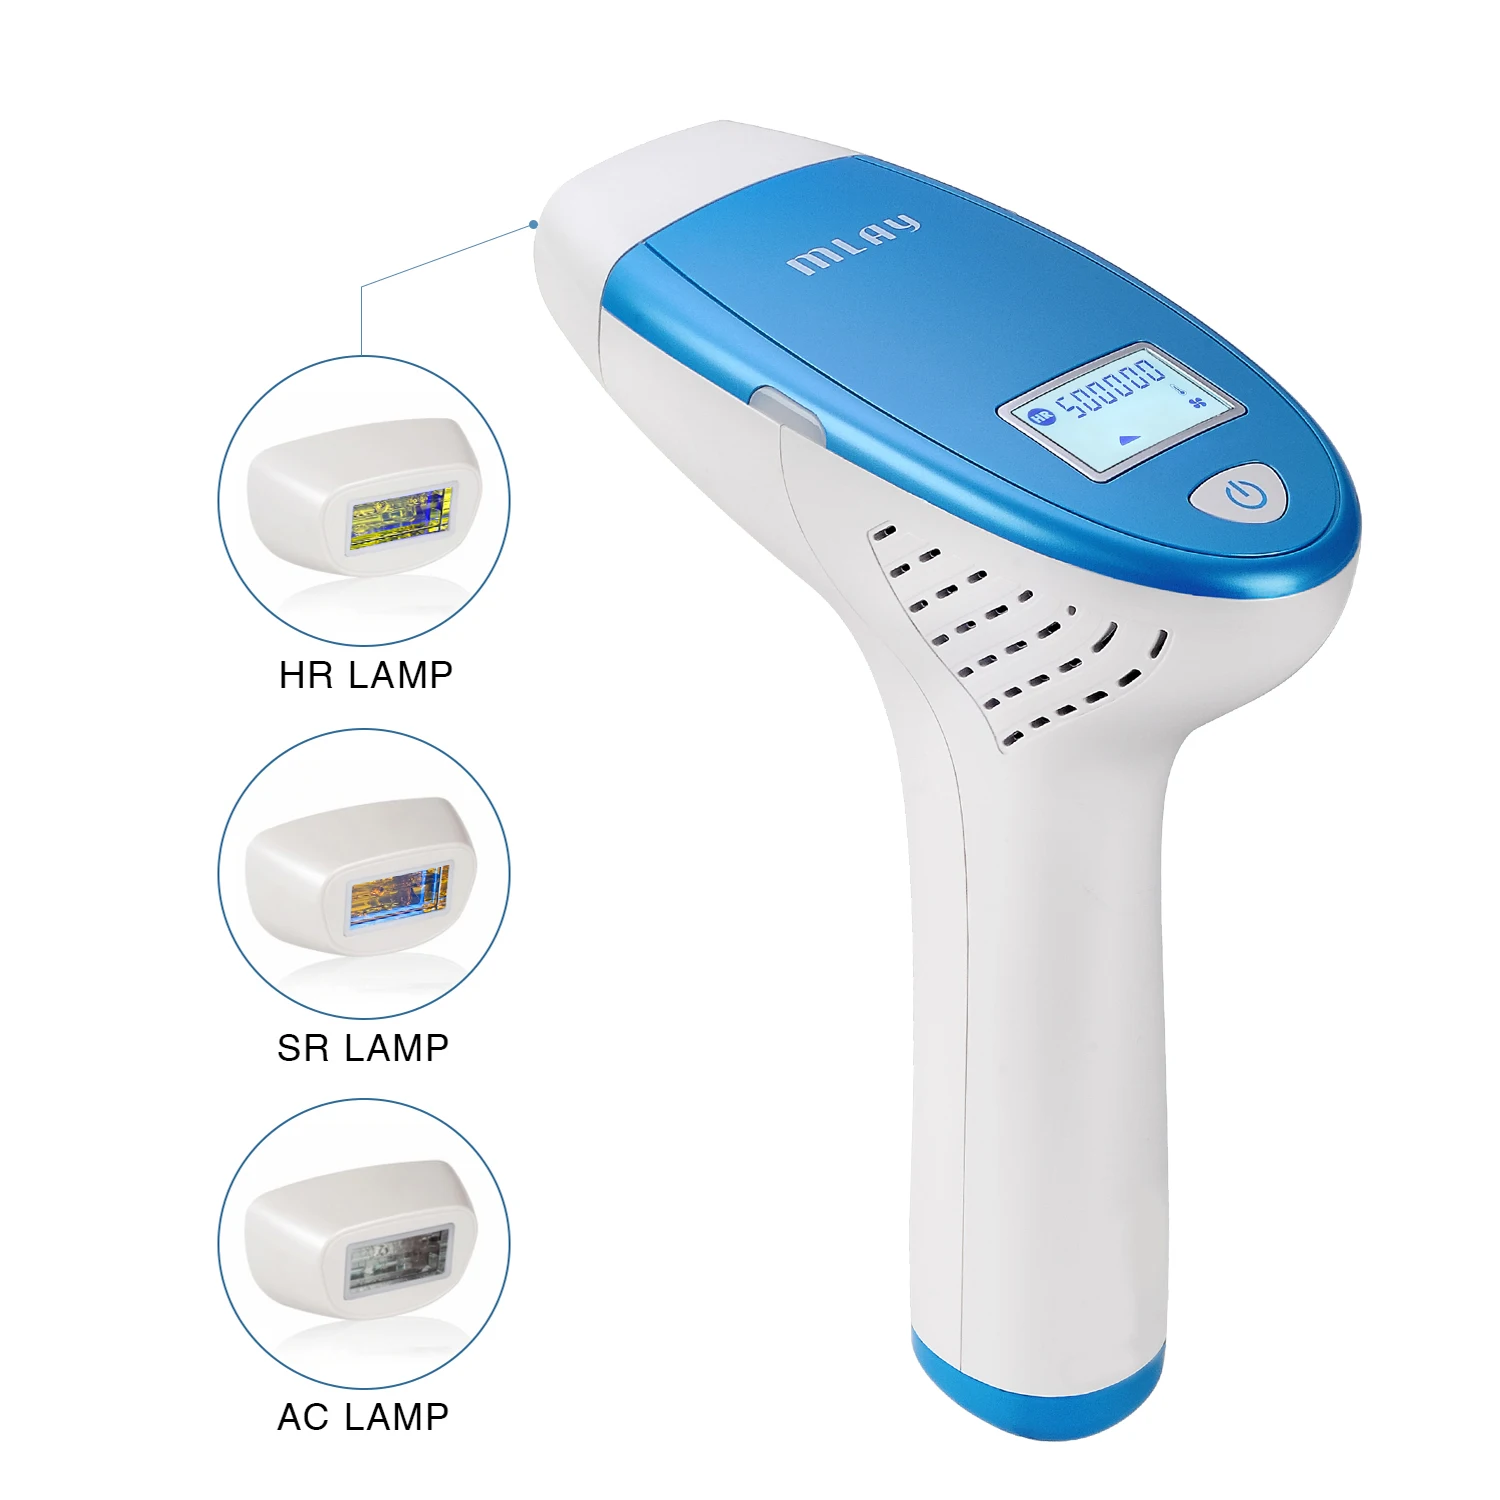 Mlay Mini IPL Laser Hair Removal Device Whole Body Home Use Personal Pulsed Acne Treatment Pigment Removal Permanent UK/US